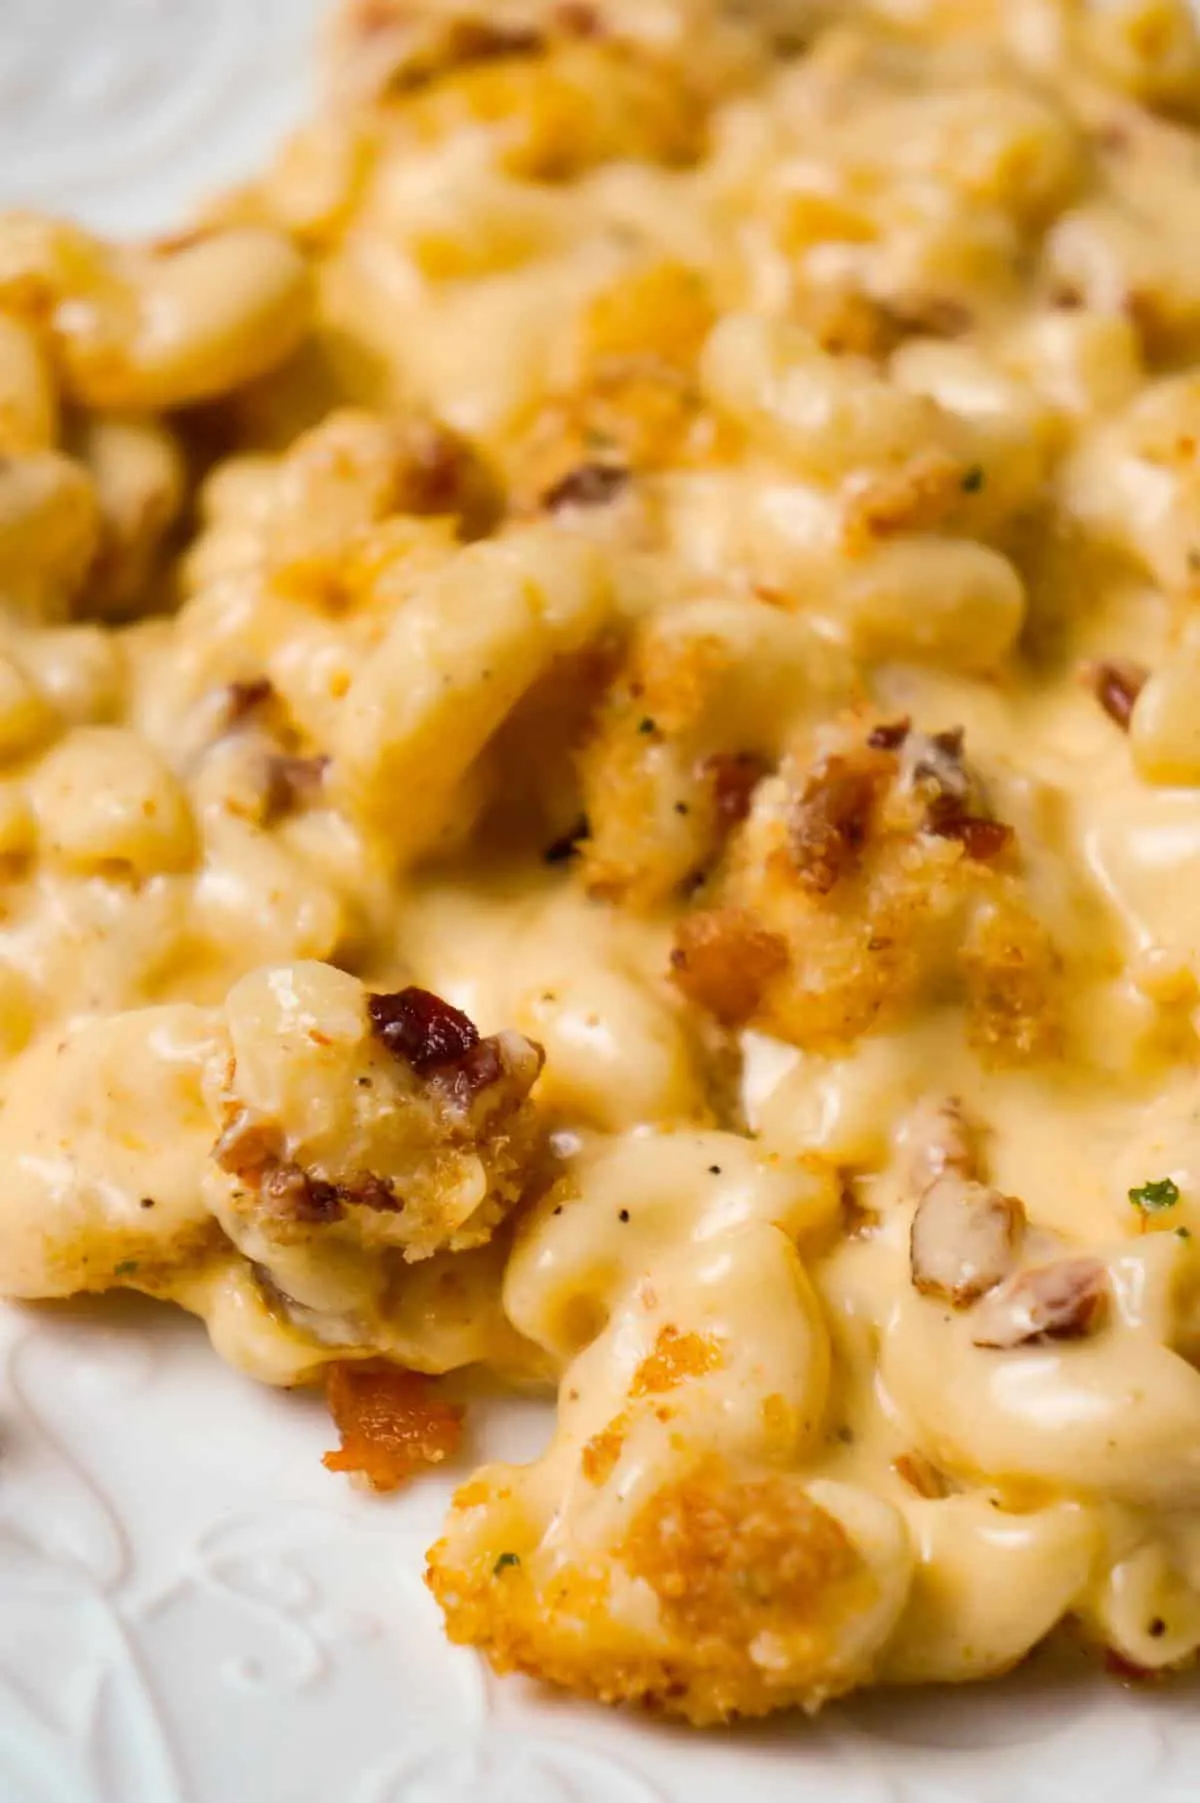 Mac and Cheese with Bacon is a creamy baked macaroni and cheese recipe made with Campbell's condensed cream of bacon soup and loaded with crumbled bacon.